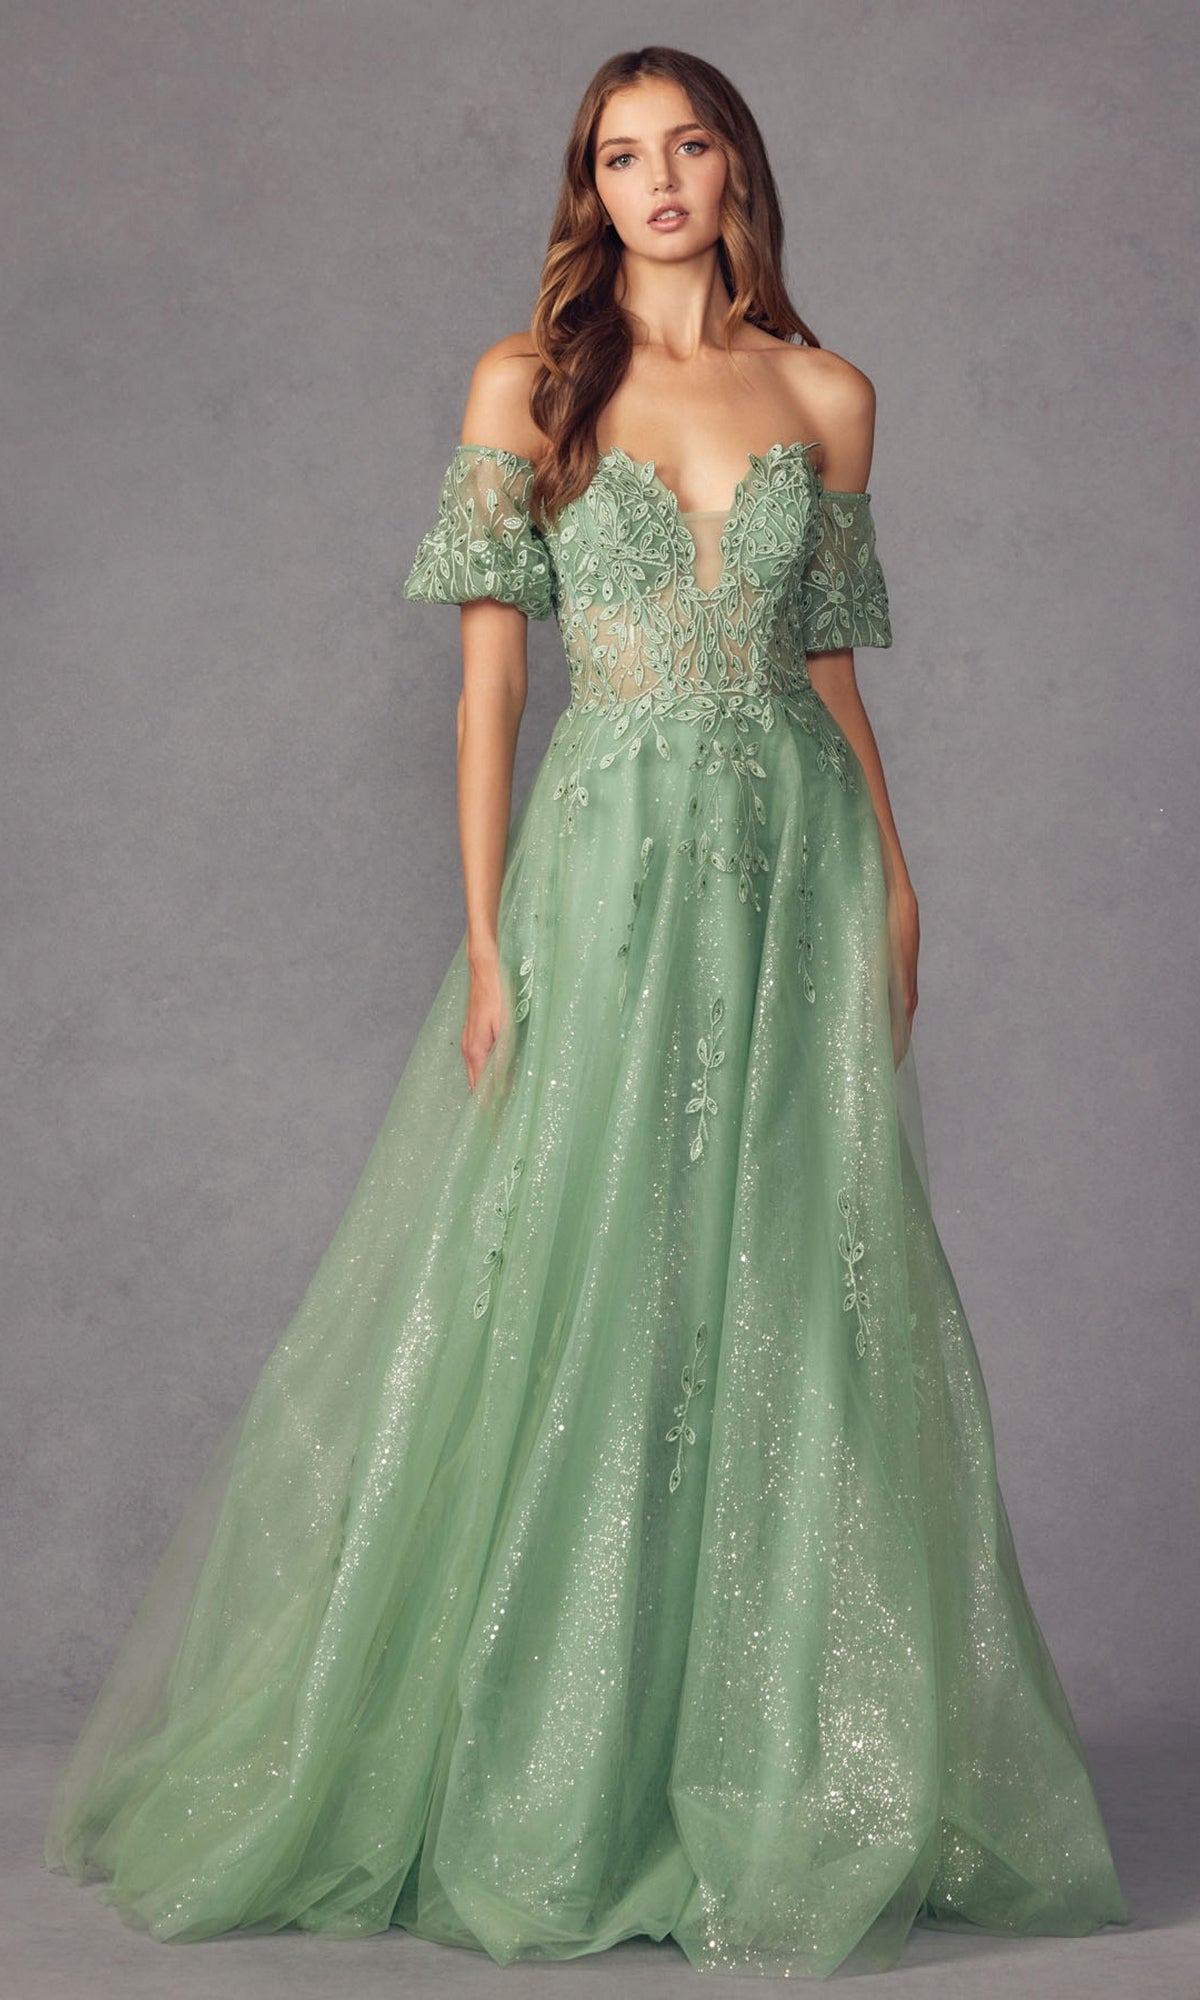 Puff-Sleeve Strapless Glitter Prom Ball Gown 2409